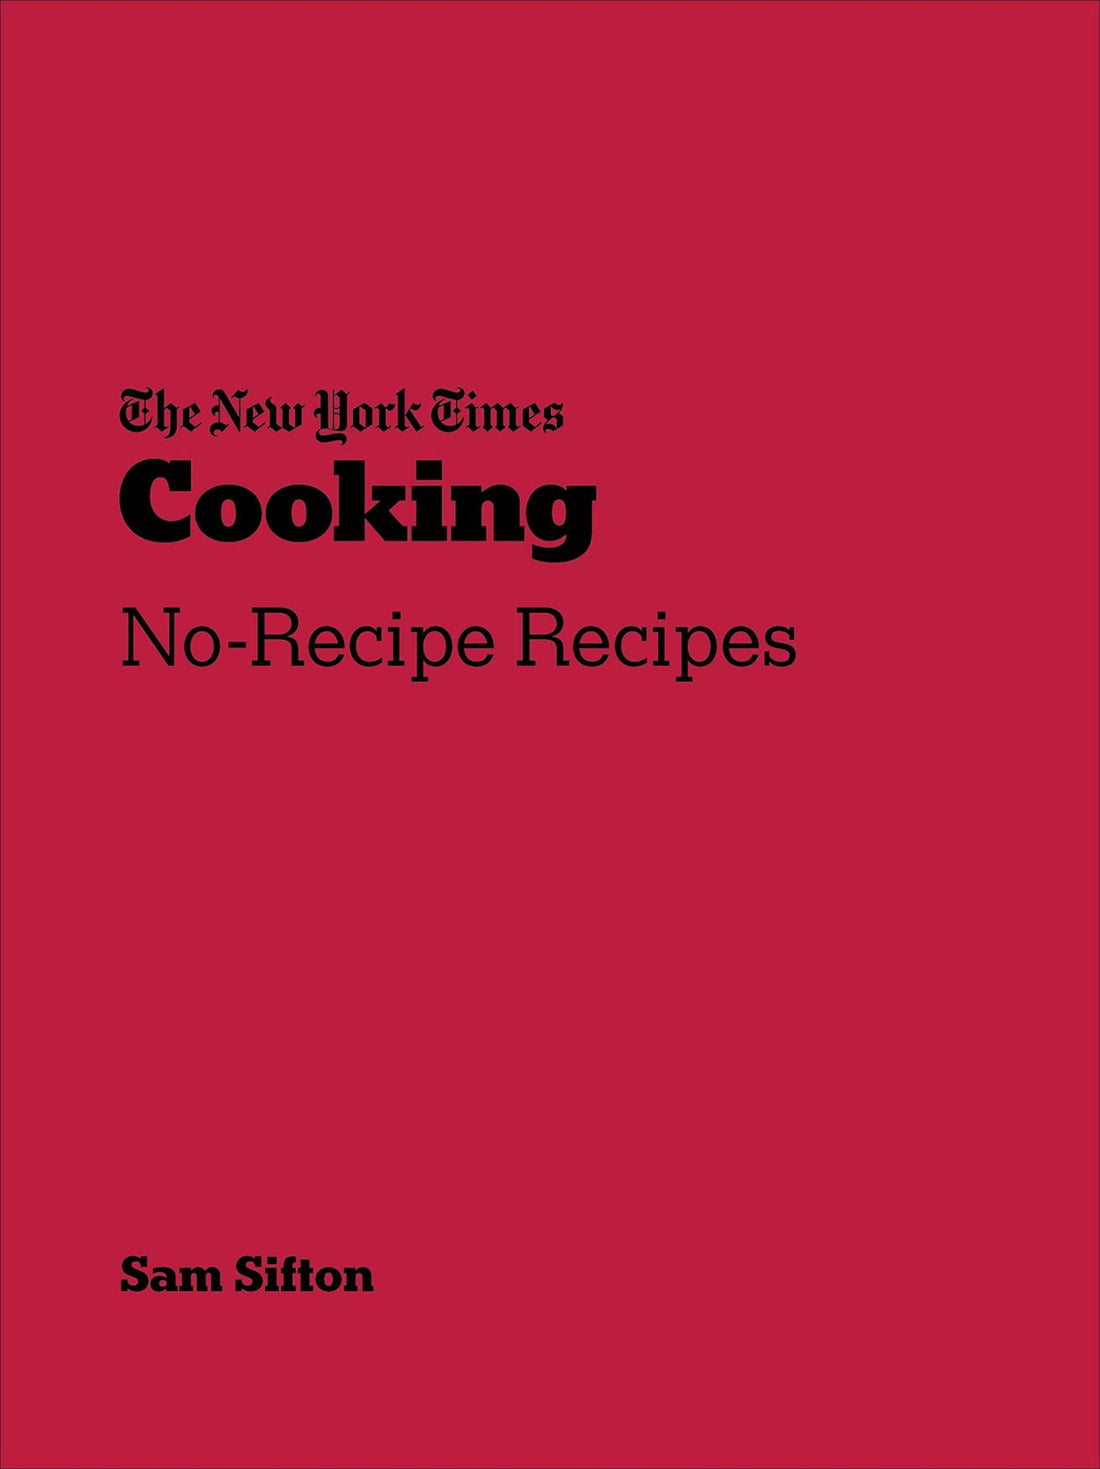 The New York Times Cooking: No-Recipe Recipes by Sam Sifton